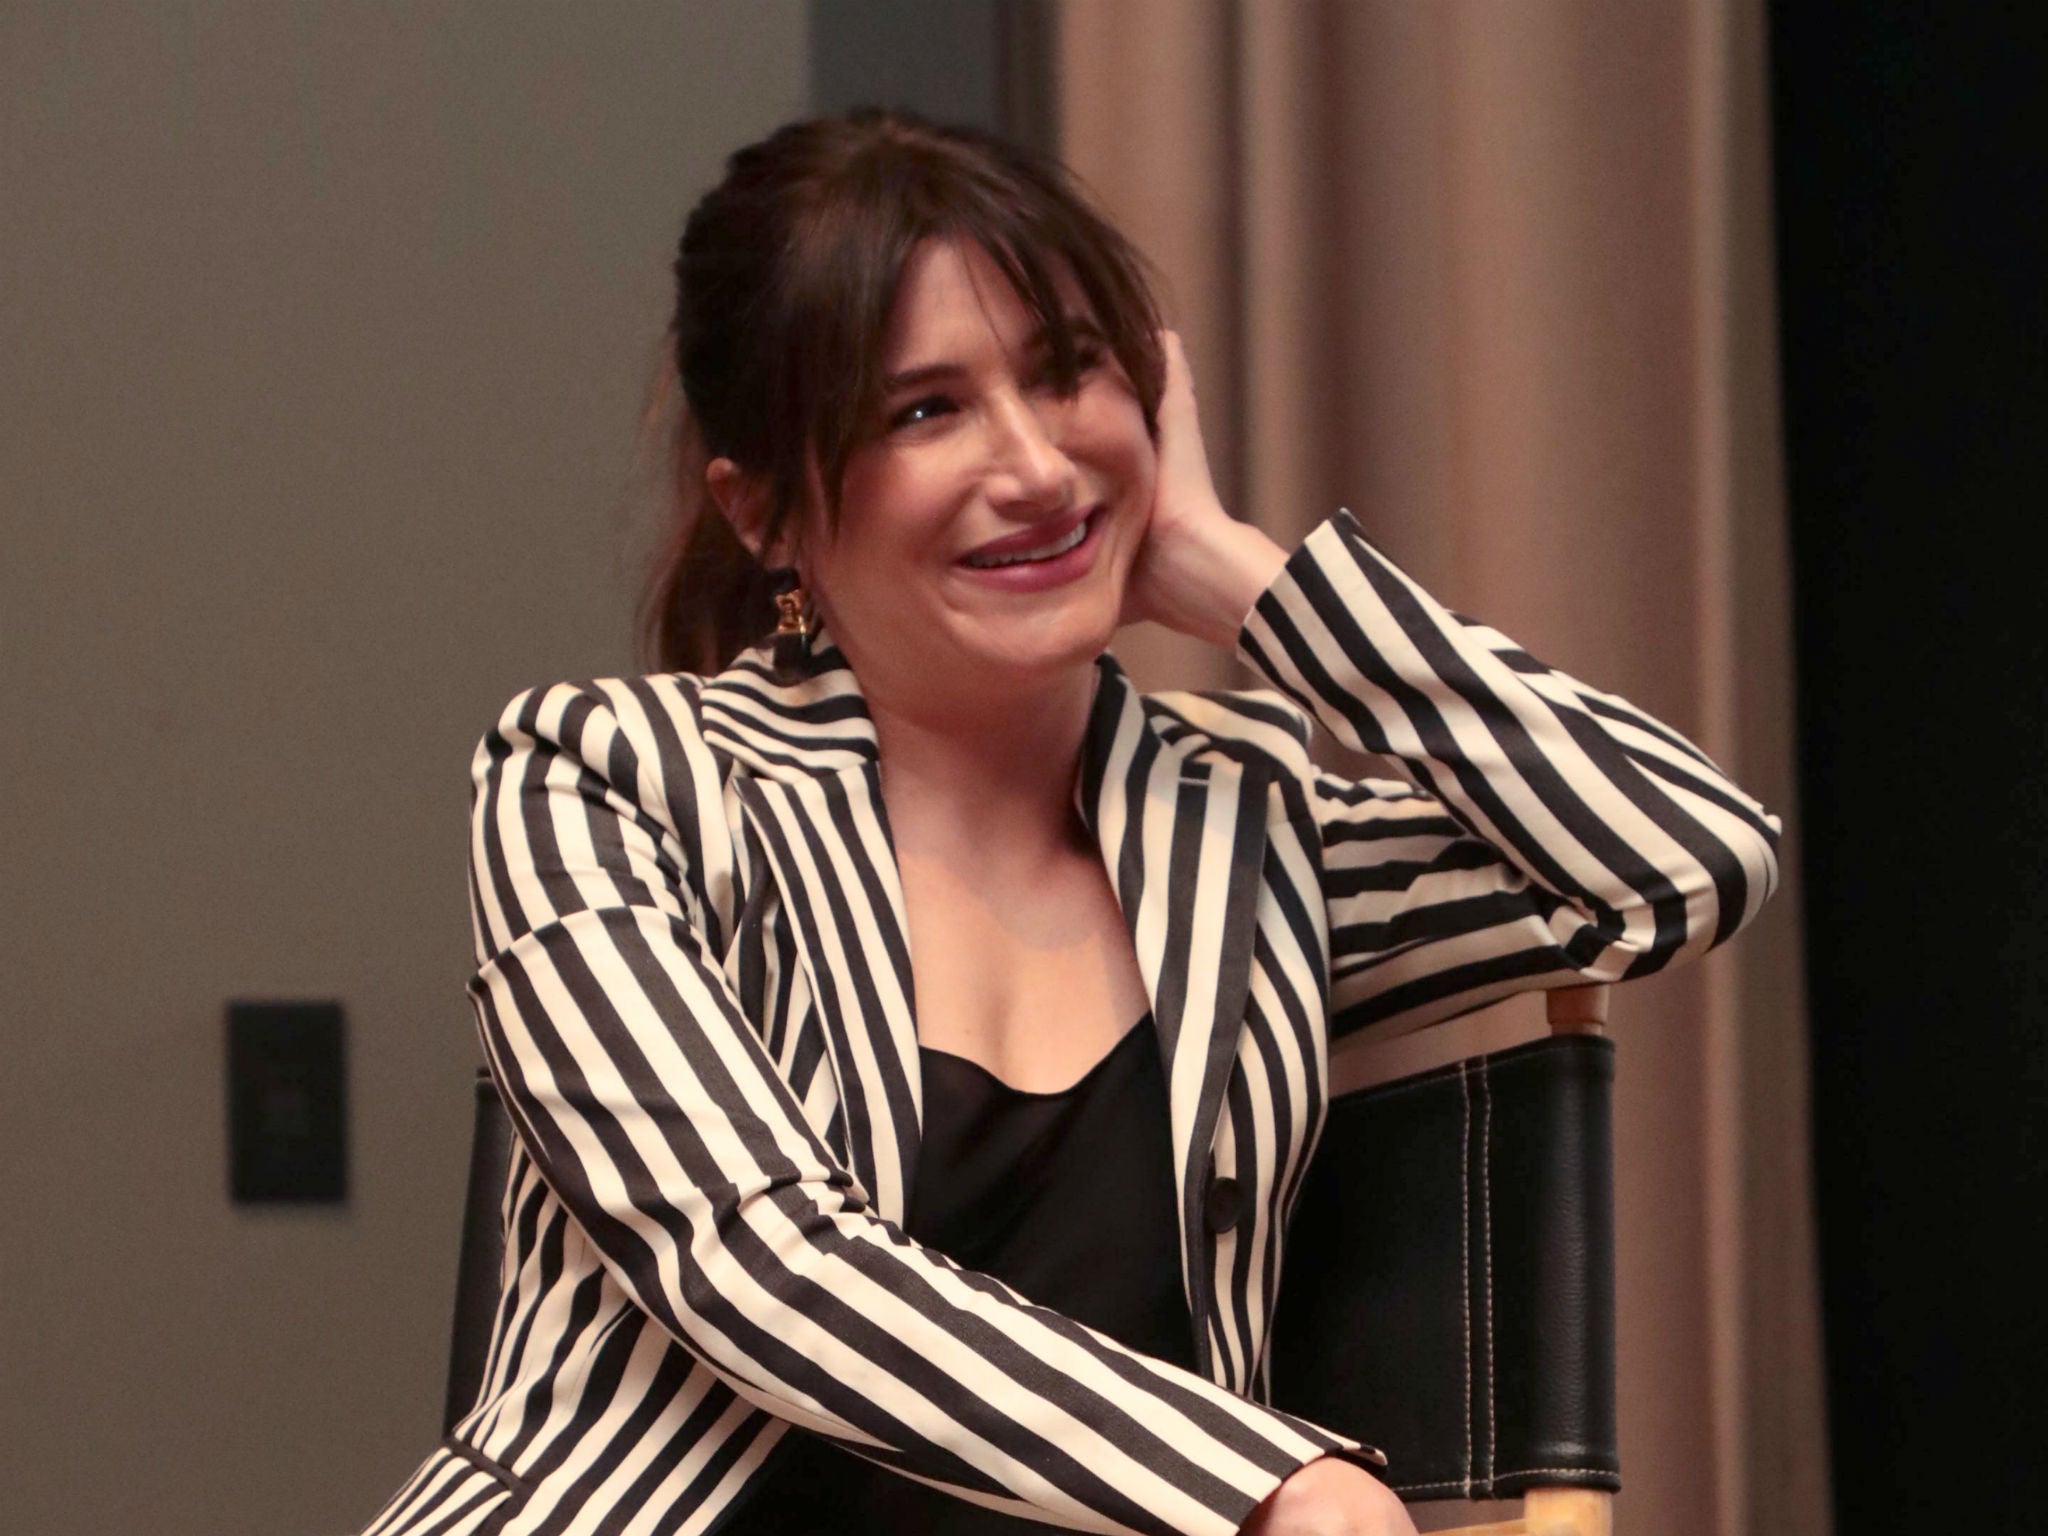 Kathryn Hahn Explains Why Parents Should Spend Less on Their Kids”